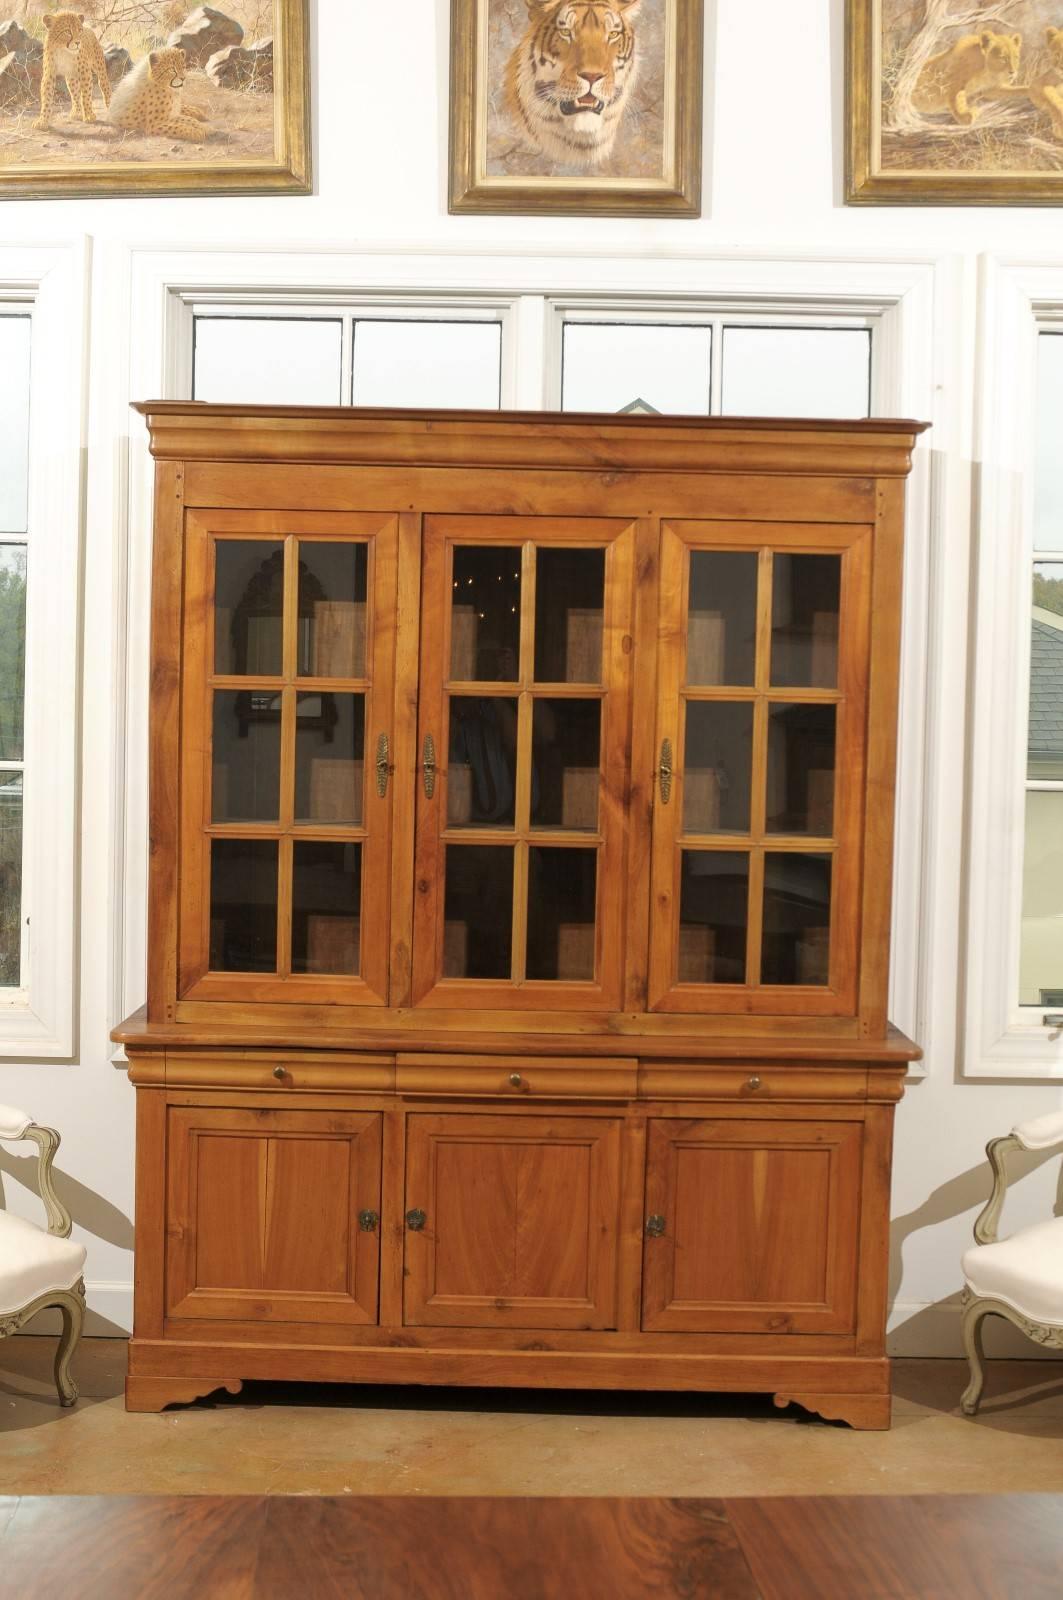 A French cherry wood two part bookcase with glass doors over three drawers and three doors from the early 20th century. This French cherry cabinet features a molded cornice sitting above three inset glass doors. Each door opens to reveal three inner